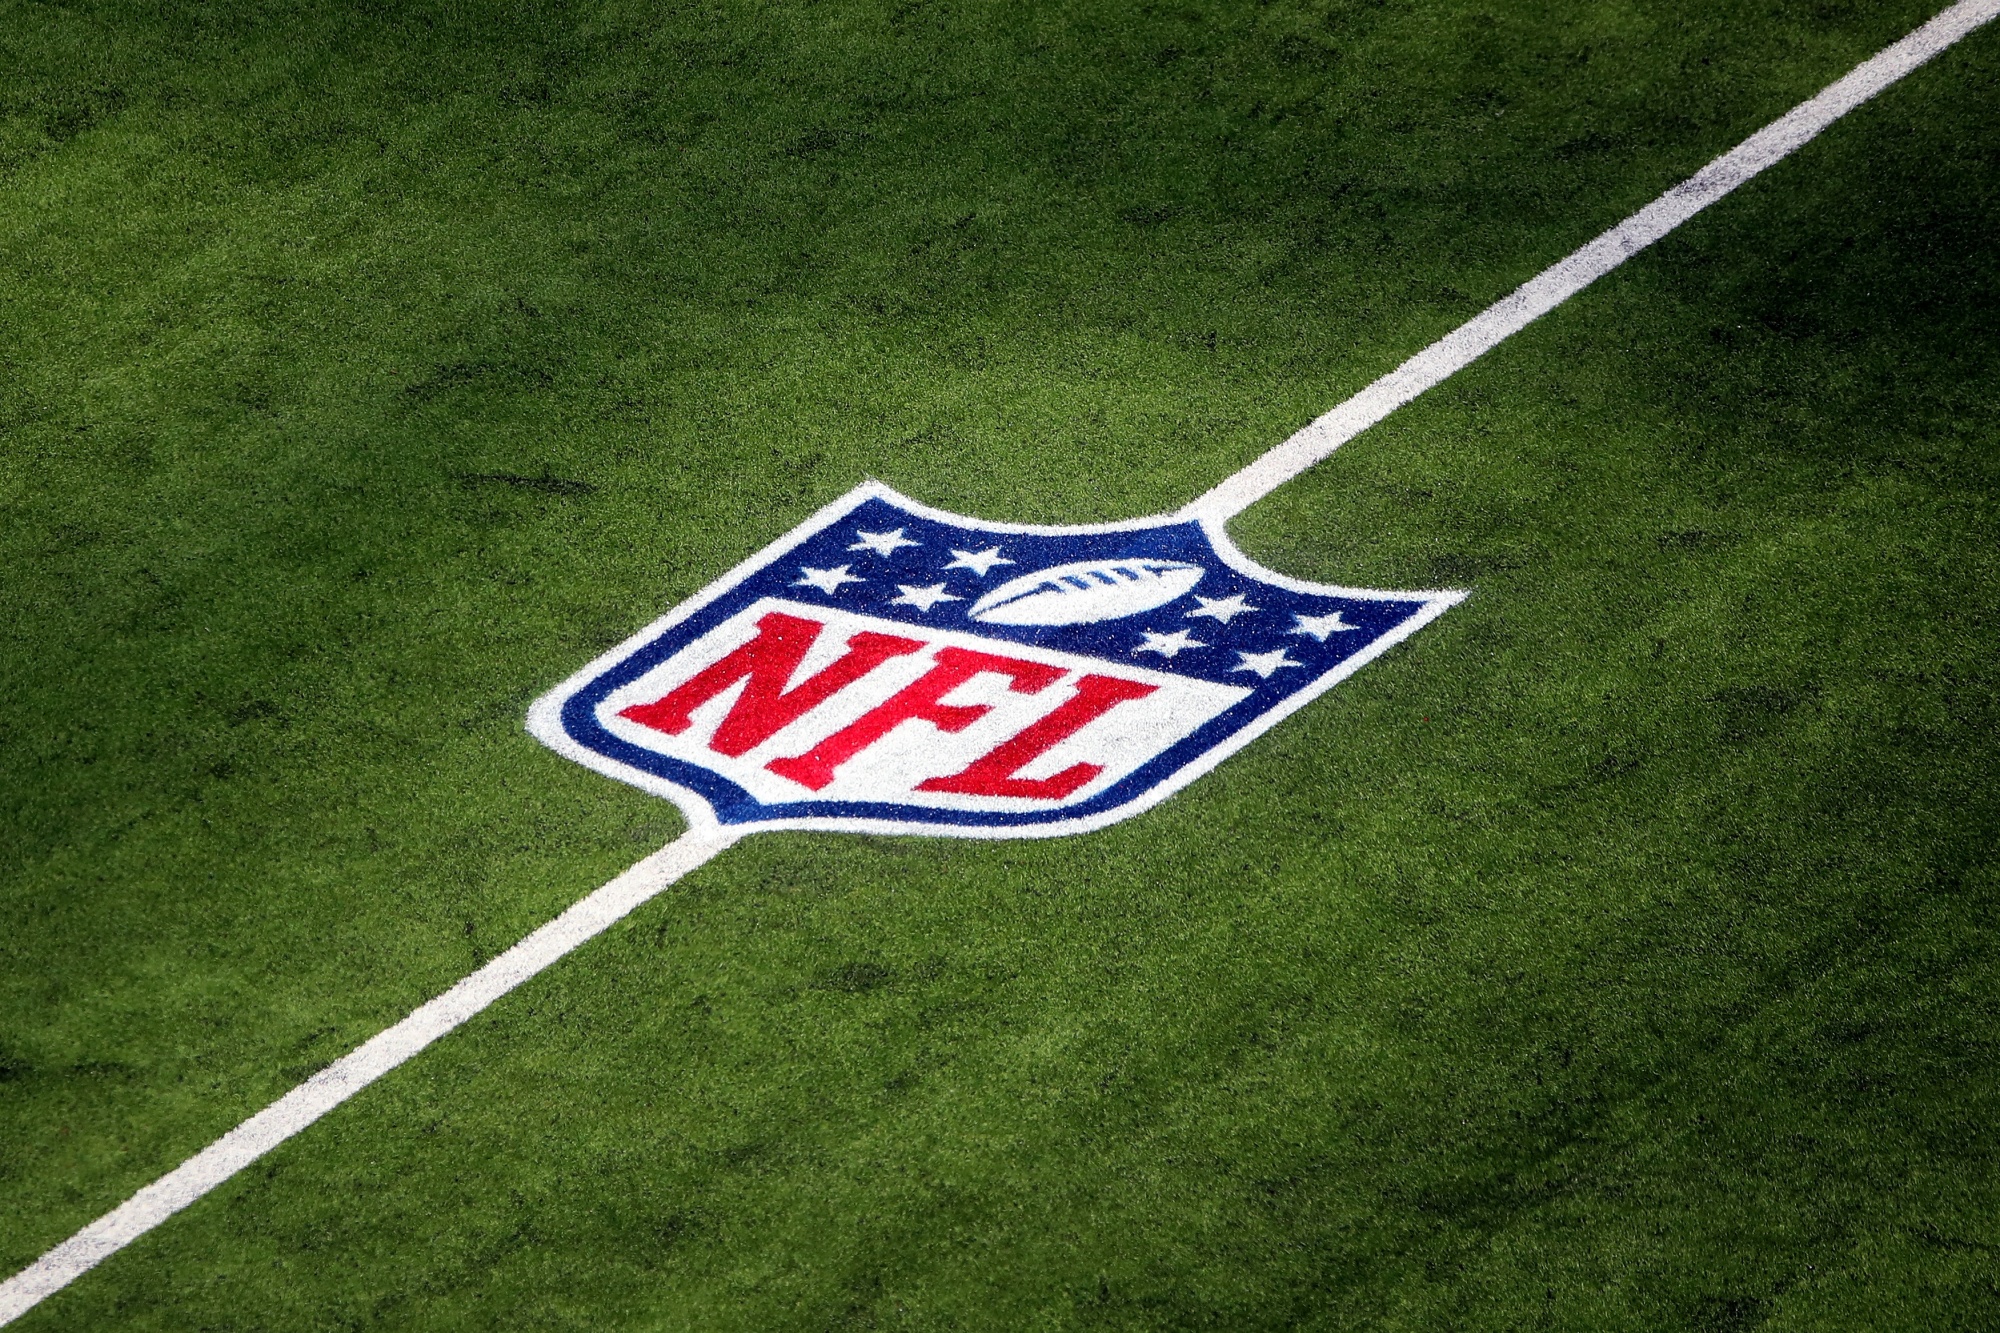 NFL All Day NFTs fall 'hundreds of millions of dollars' short of